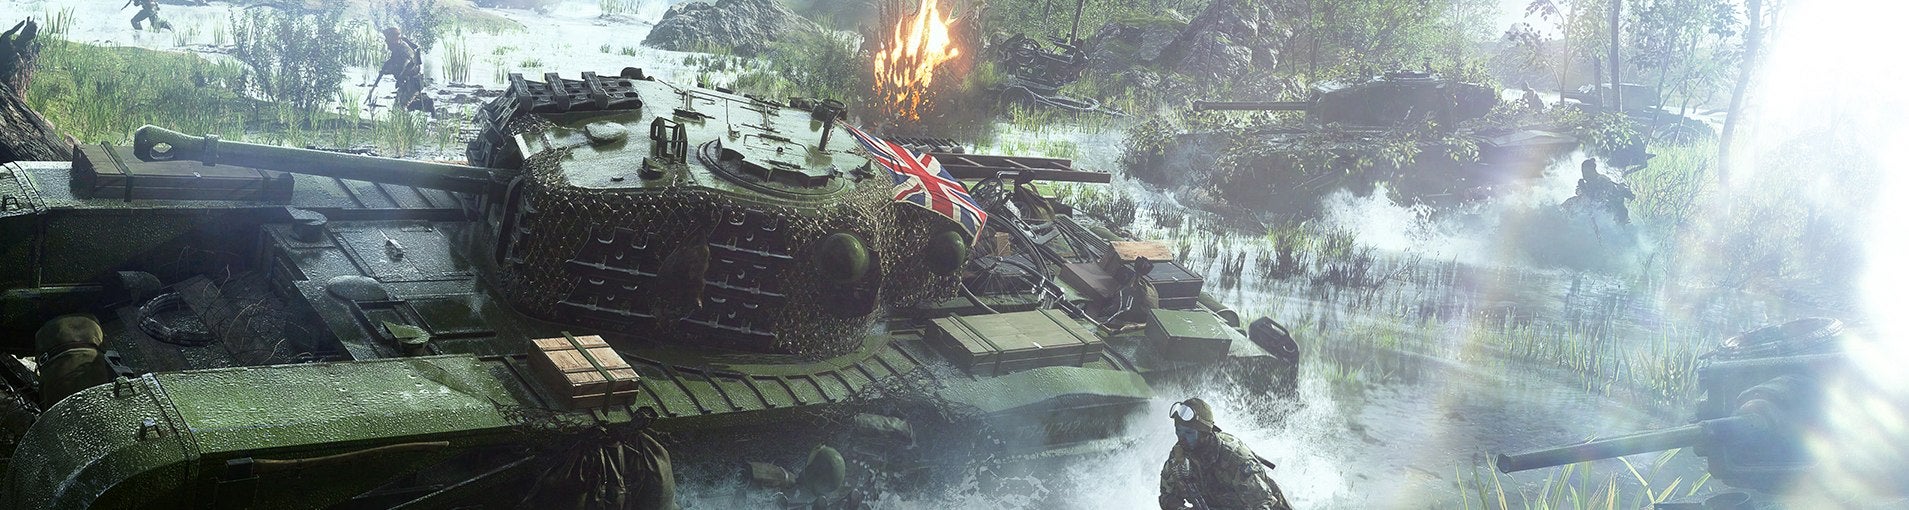 Image for Battlefield 5 Guide - All the Essential BF5 Beginner's Tips